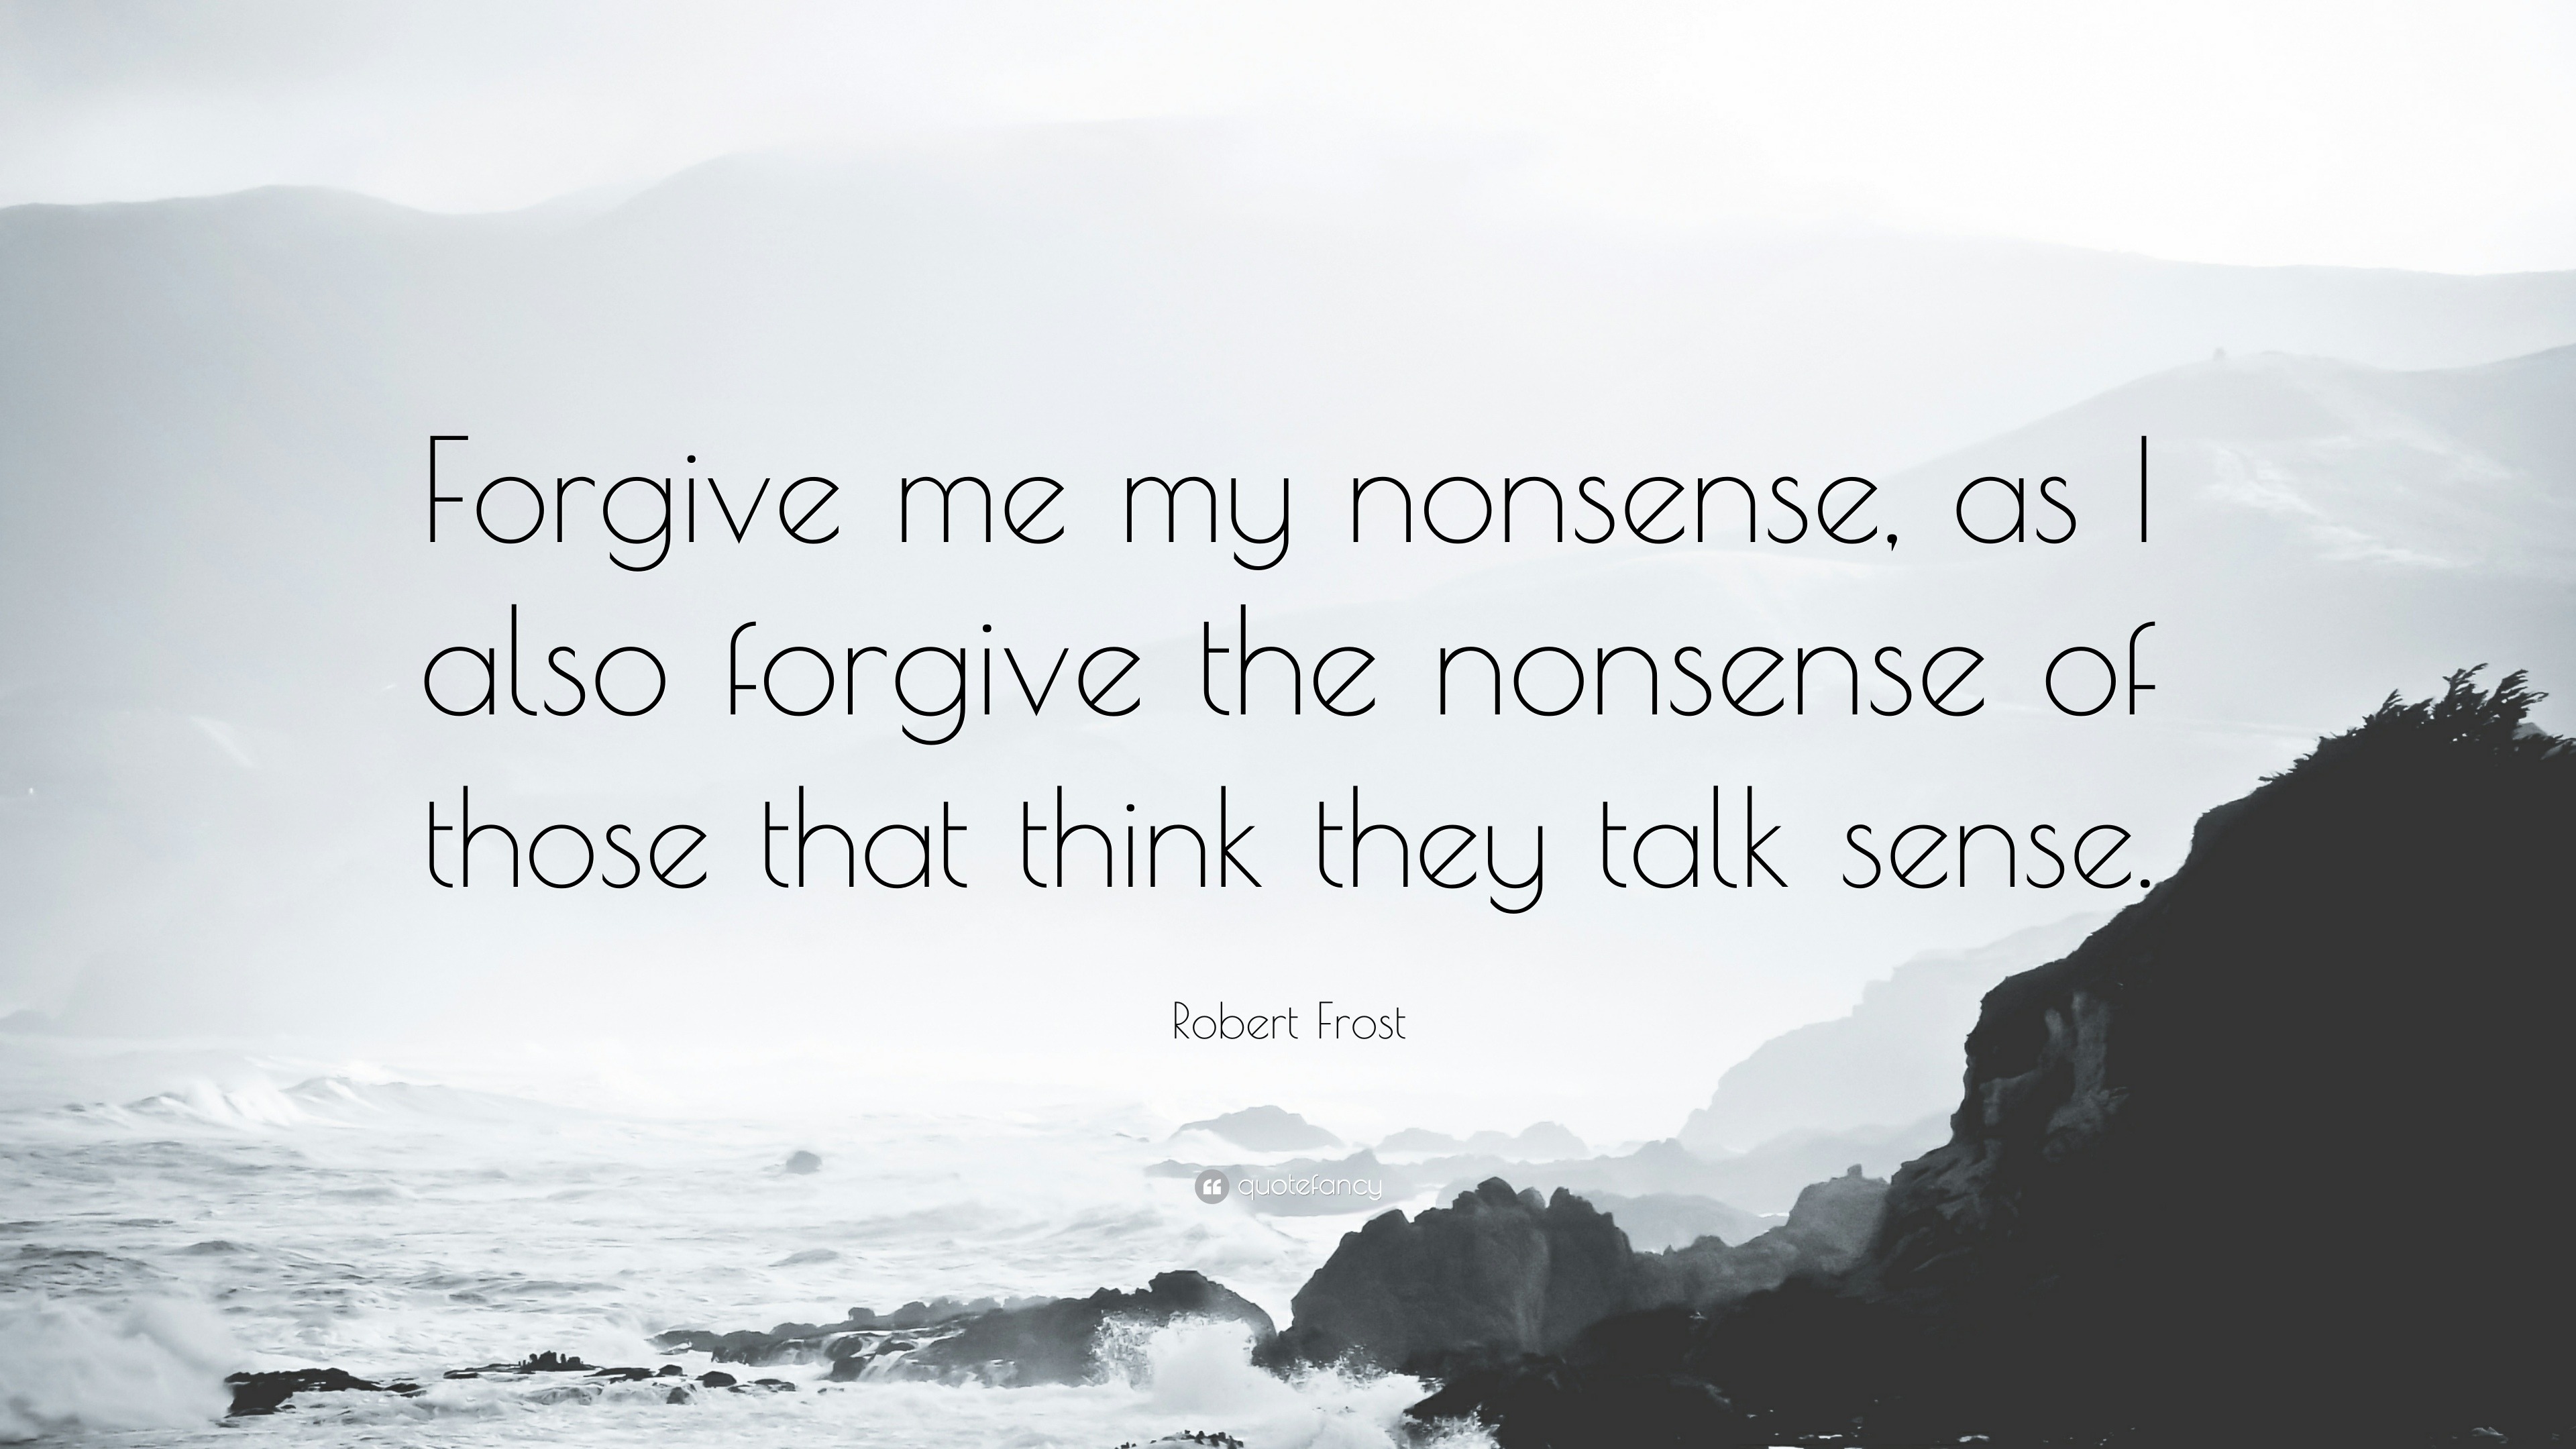 Free Robert Frost - Forgive me my nonsense, as I also forgive the nonsense  of those that think they talk sense. - Download in JPG